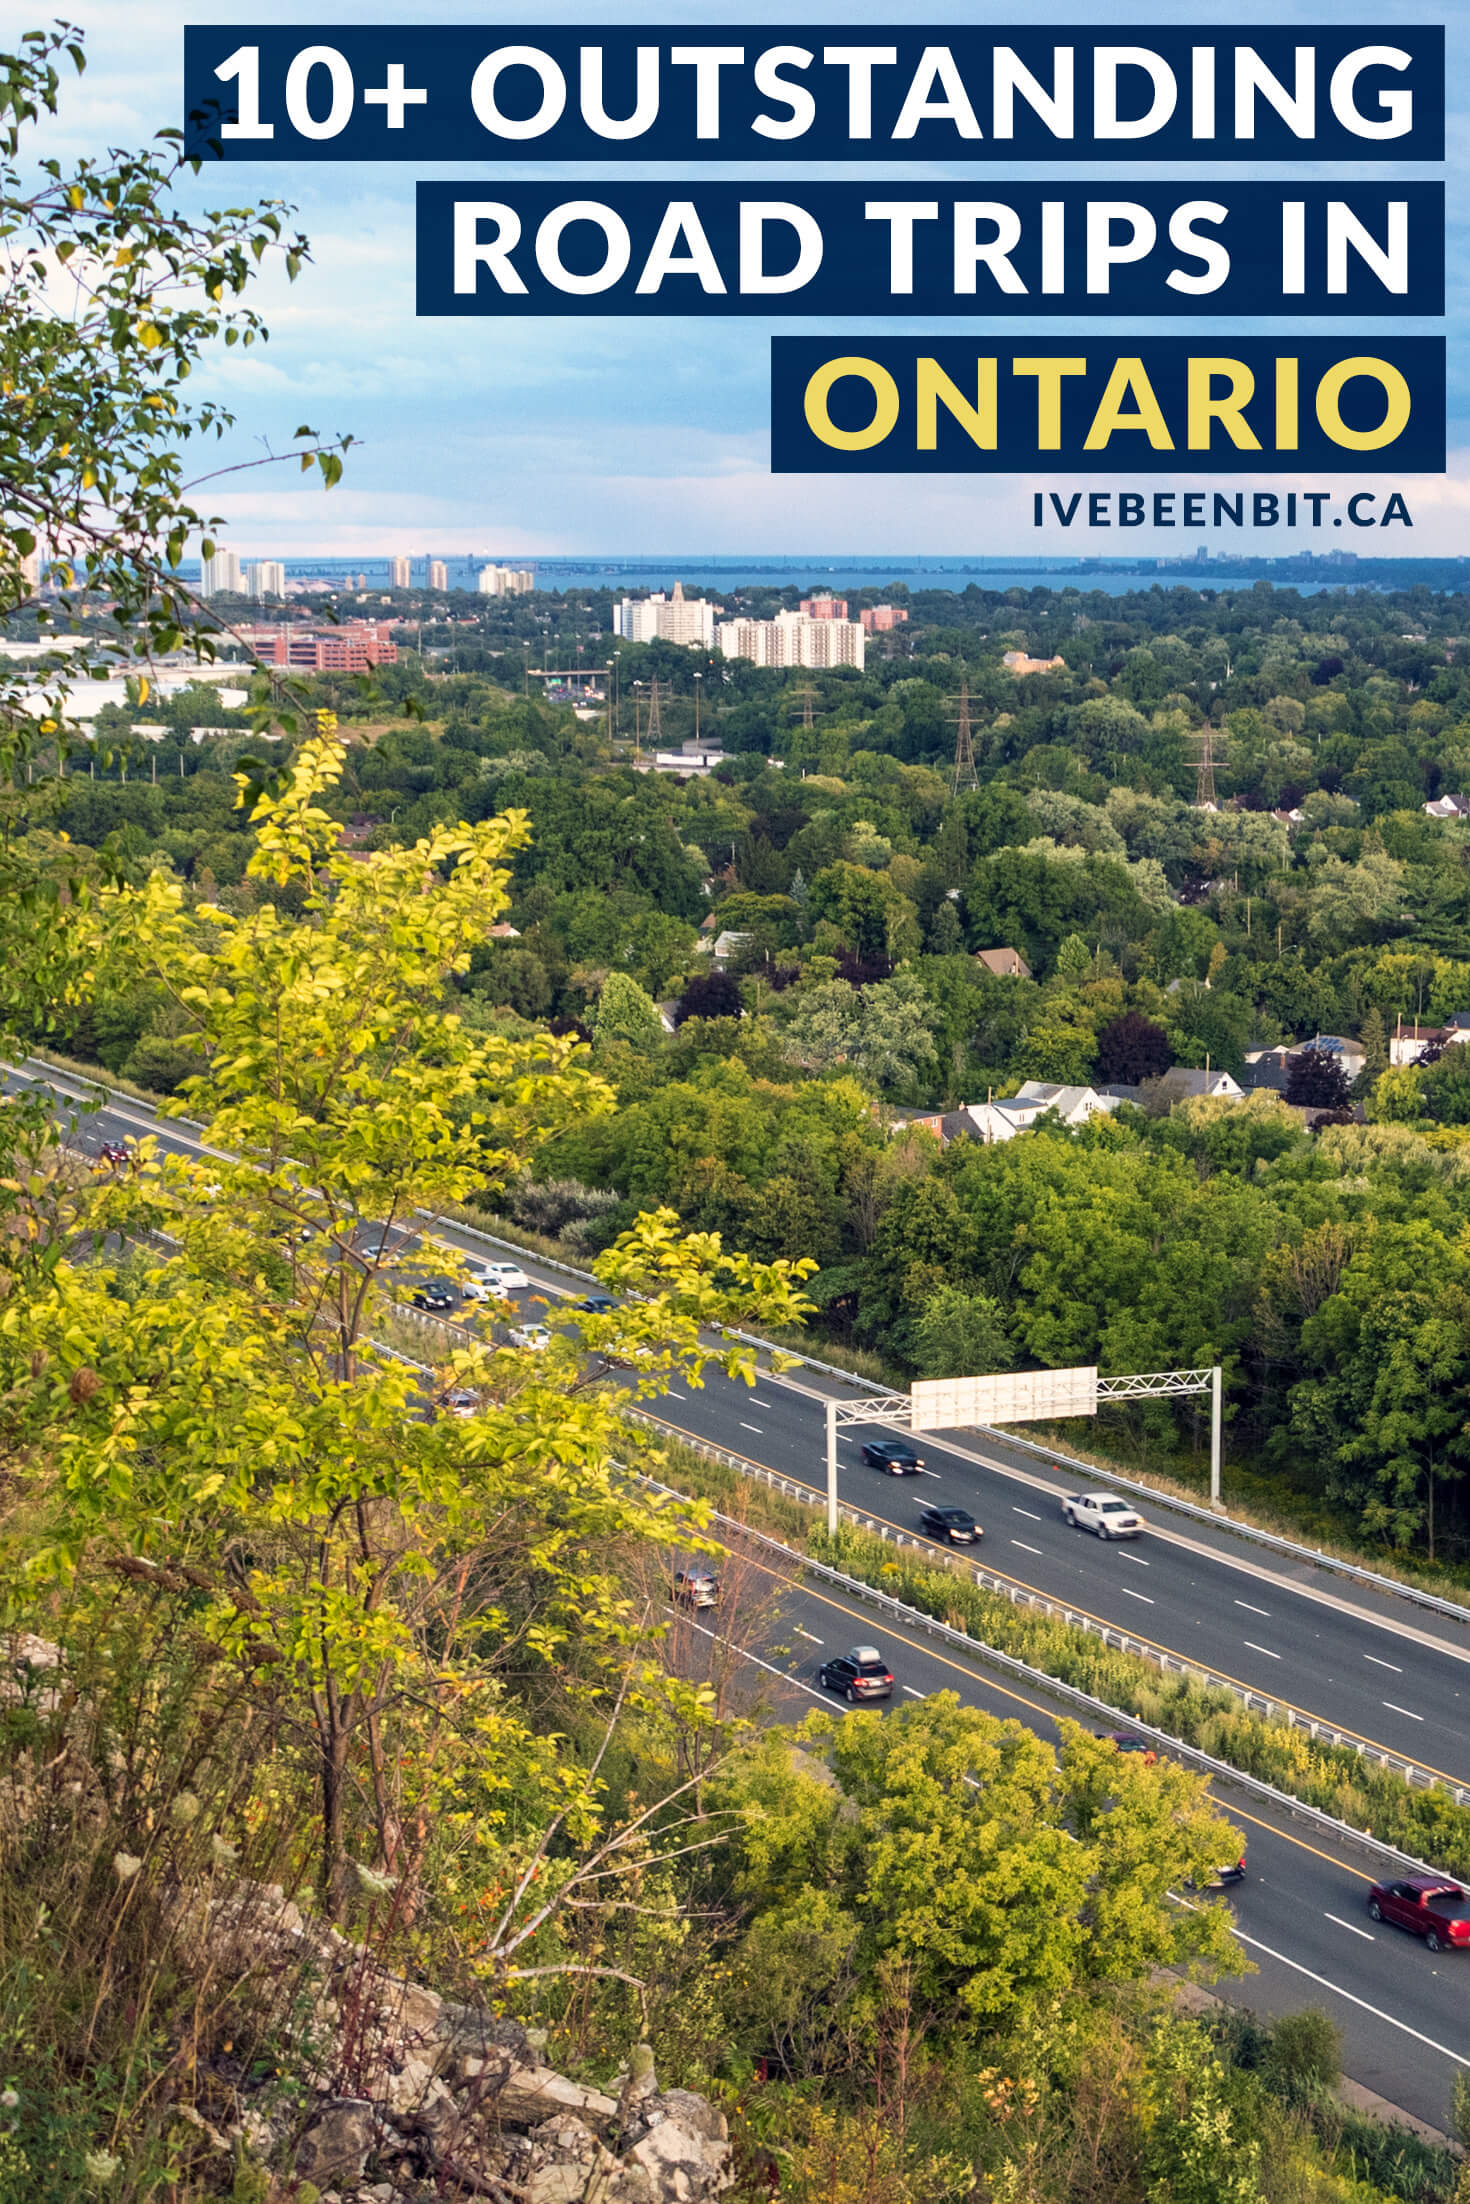 Whether you're looking for day trips from Toronto, weekend adventures or longer excursions, these are the best Ontario road trips you have to experience! There are so many amazing places to go on a road trip in Ontario - just click the link for some serious Ontario Canada travel inspiration! | #Travel #Canada #Ontario #RoadTrip #Toronto | IveBeenBit.ca